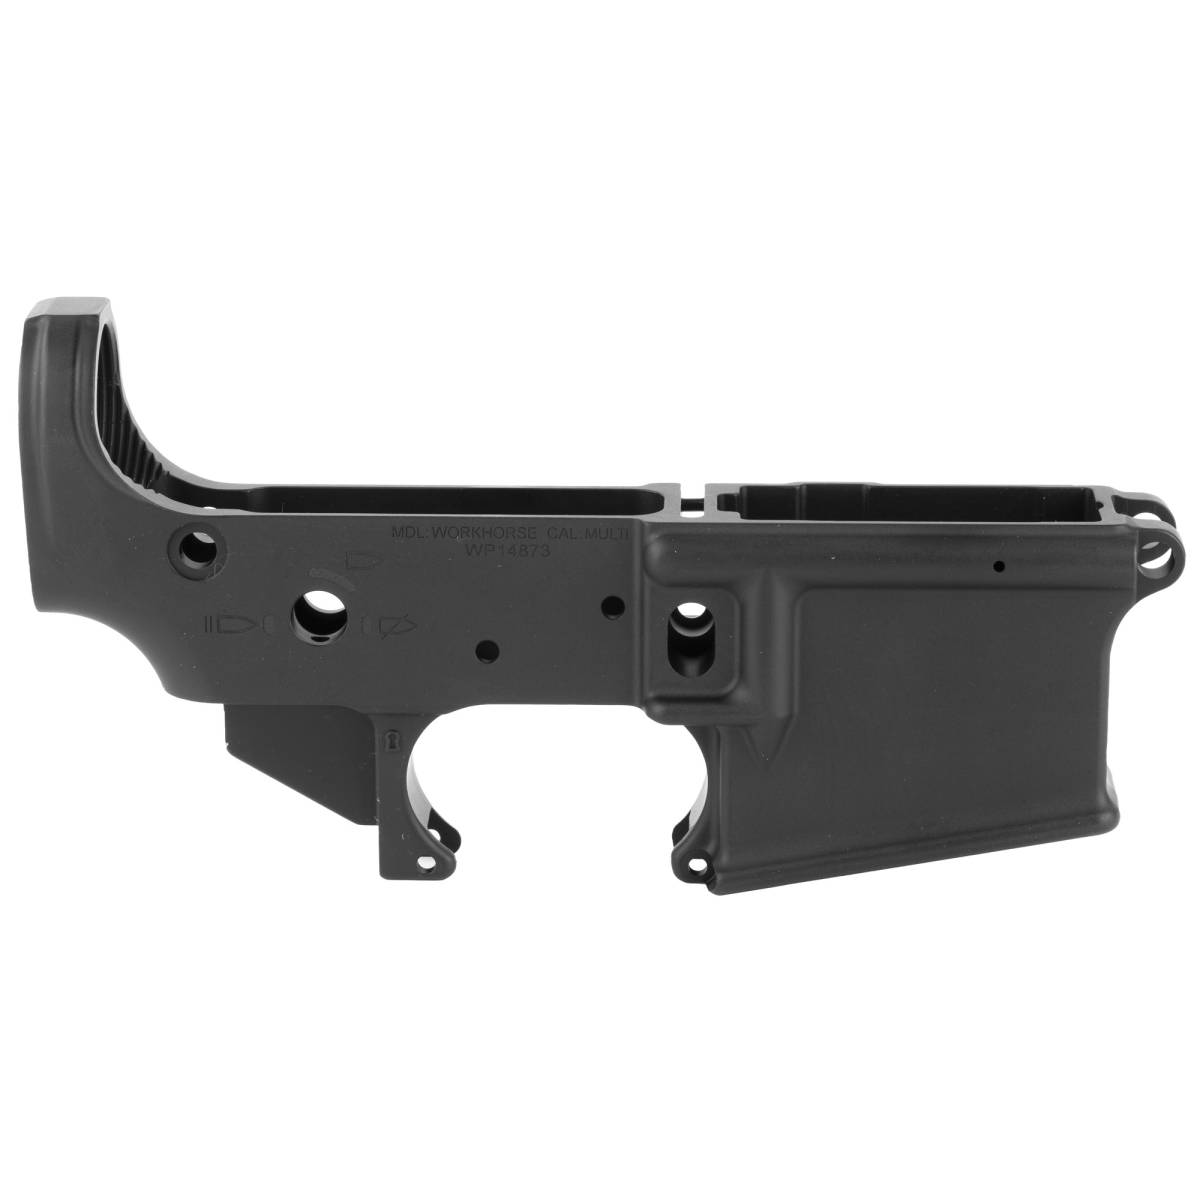 BAD WORKHORSE LOWER RECEIVER BLK-img-1